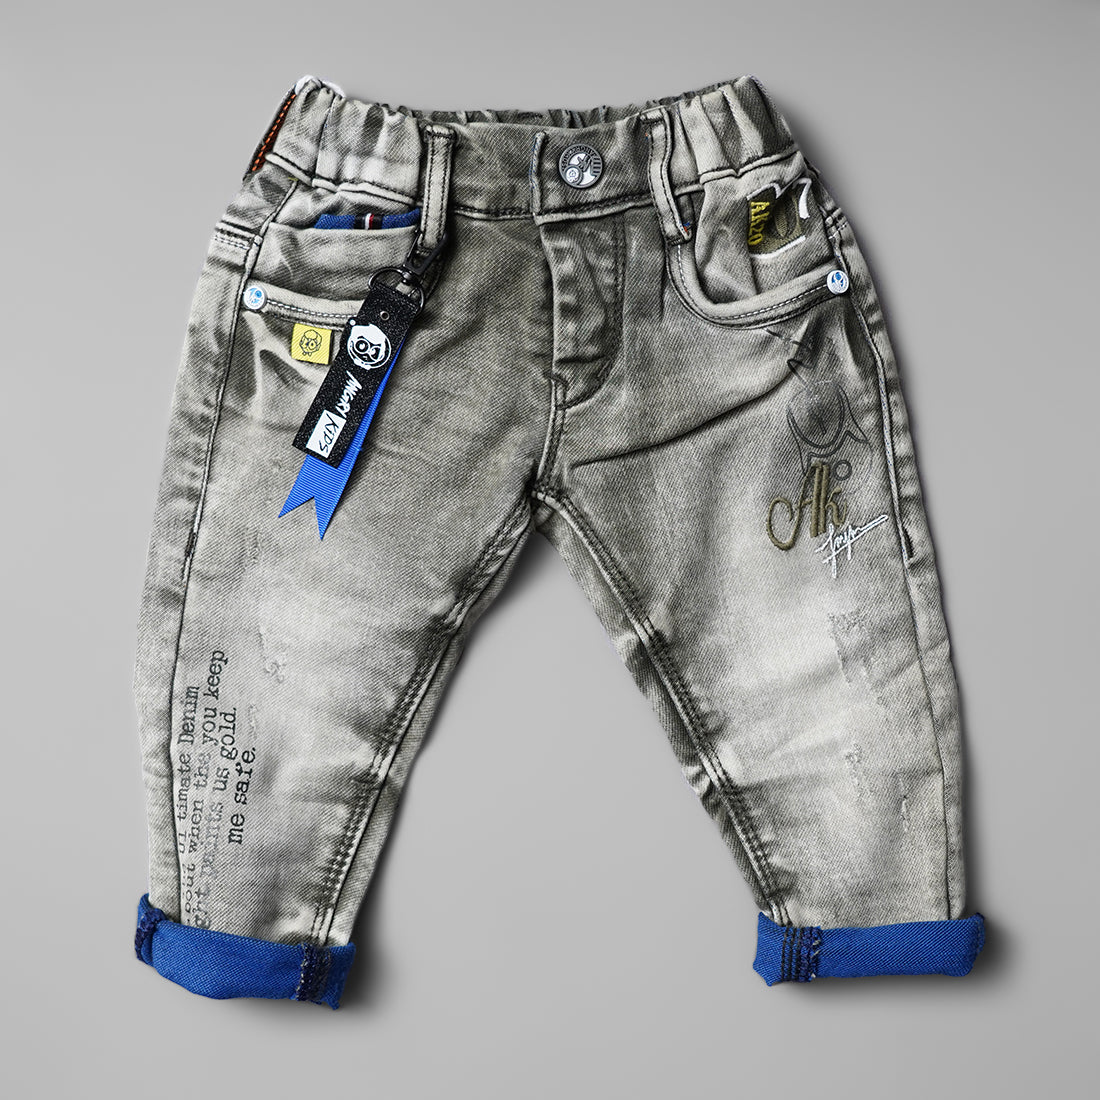 Buy 3905 Child Baby Boys Kids Jeans Soft Casual Denim Pants Trousers Blue  Baby Jeans (2T) at Amazon.in